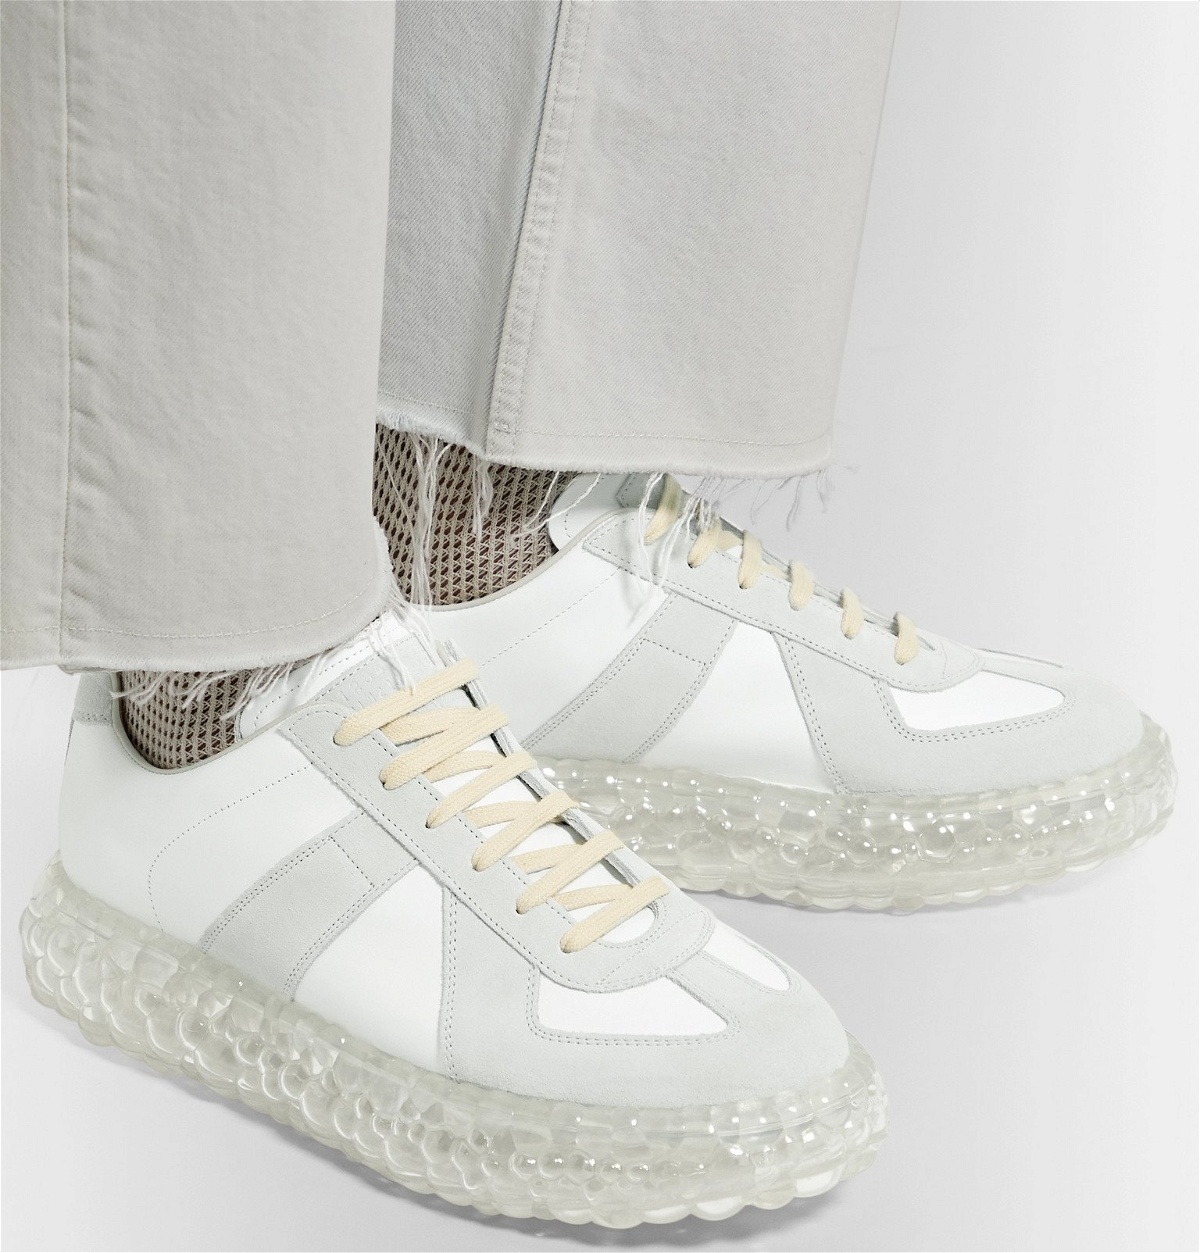 Maison Margiela - Replica Super Bounce Leather and Suede Sneakers ...